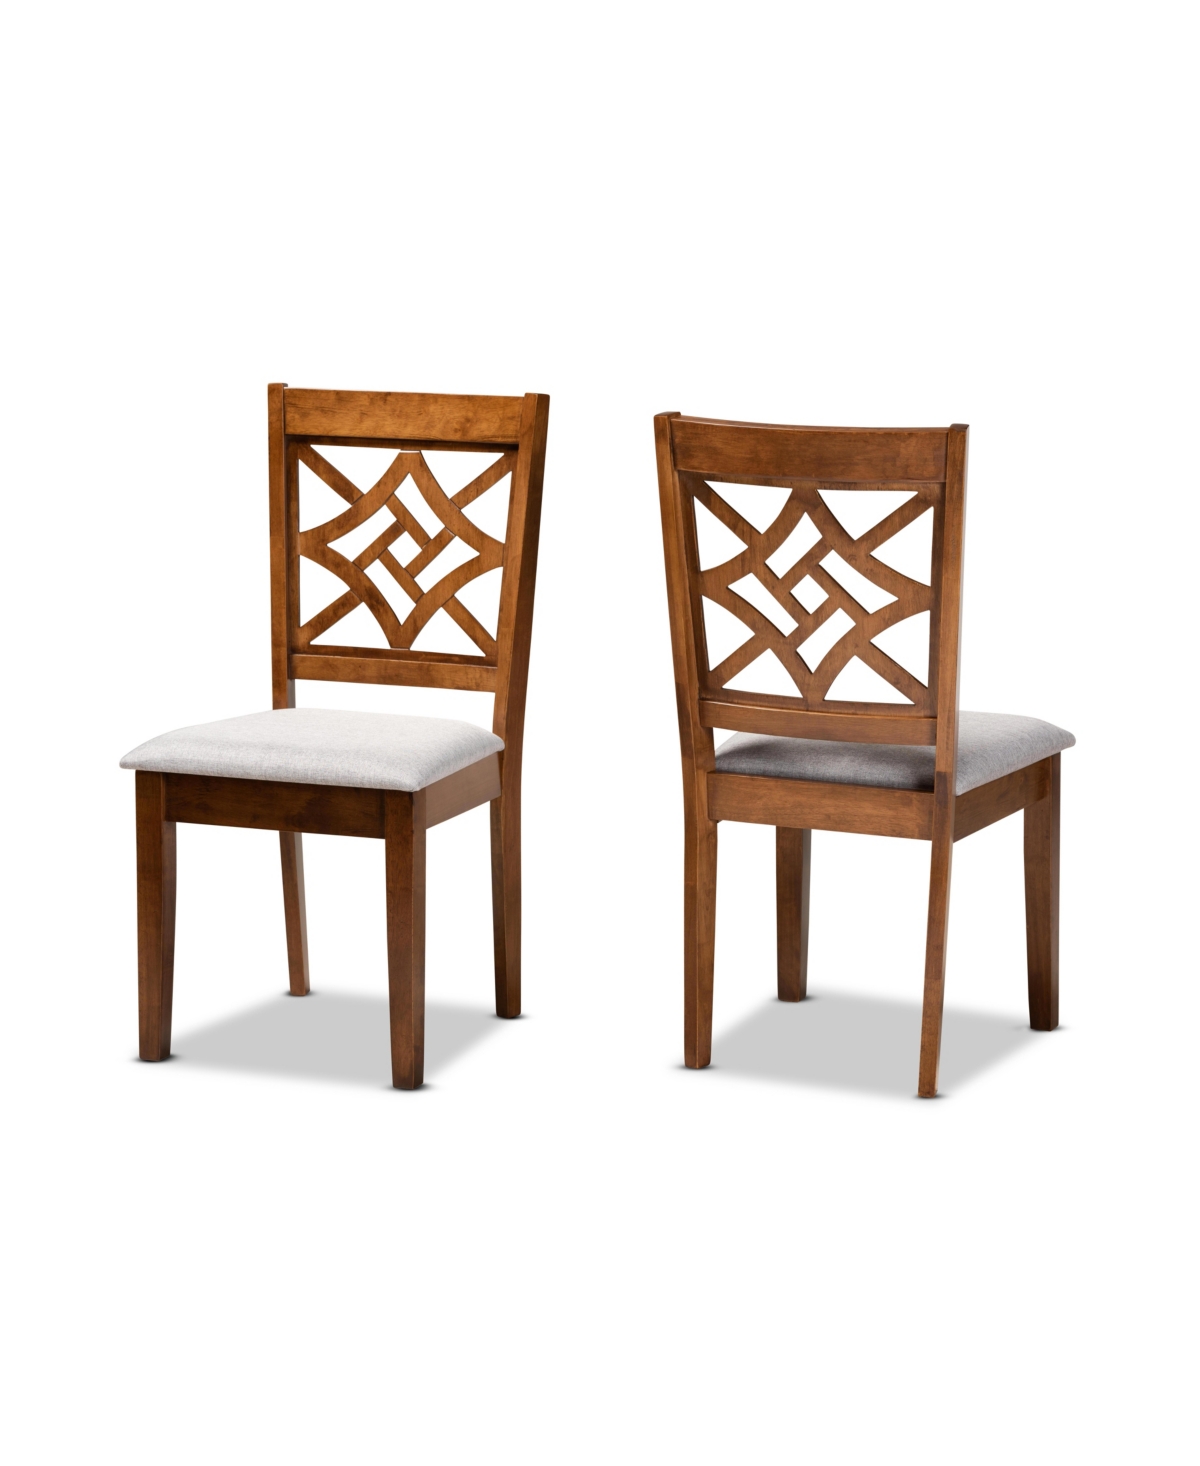 Baxton Studio Nicolette Modern And Contemporary Wood Dining Chair Set, 2 Piece In Gray/walnut Brown